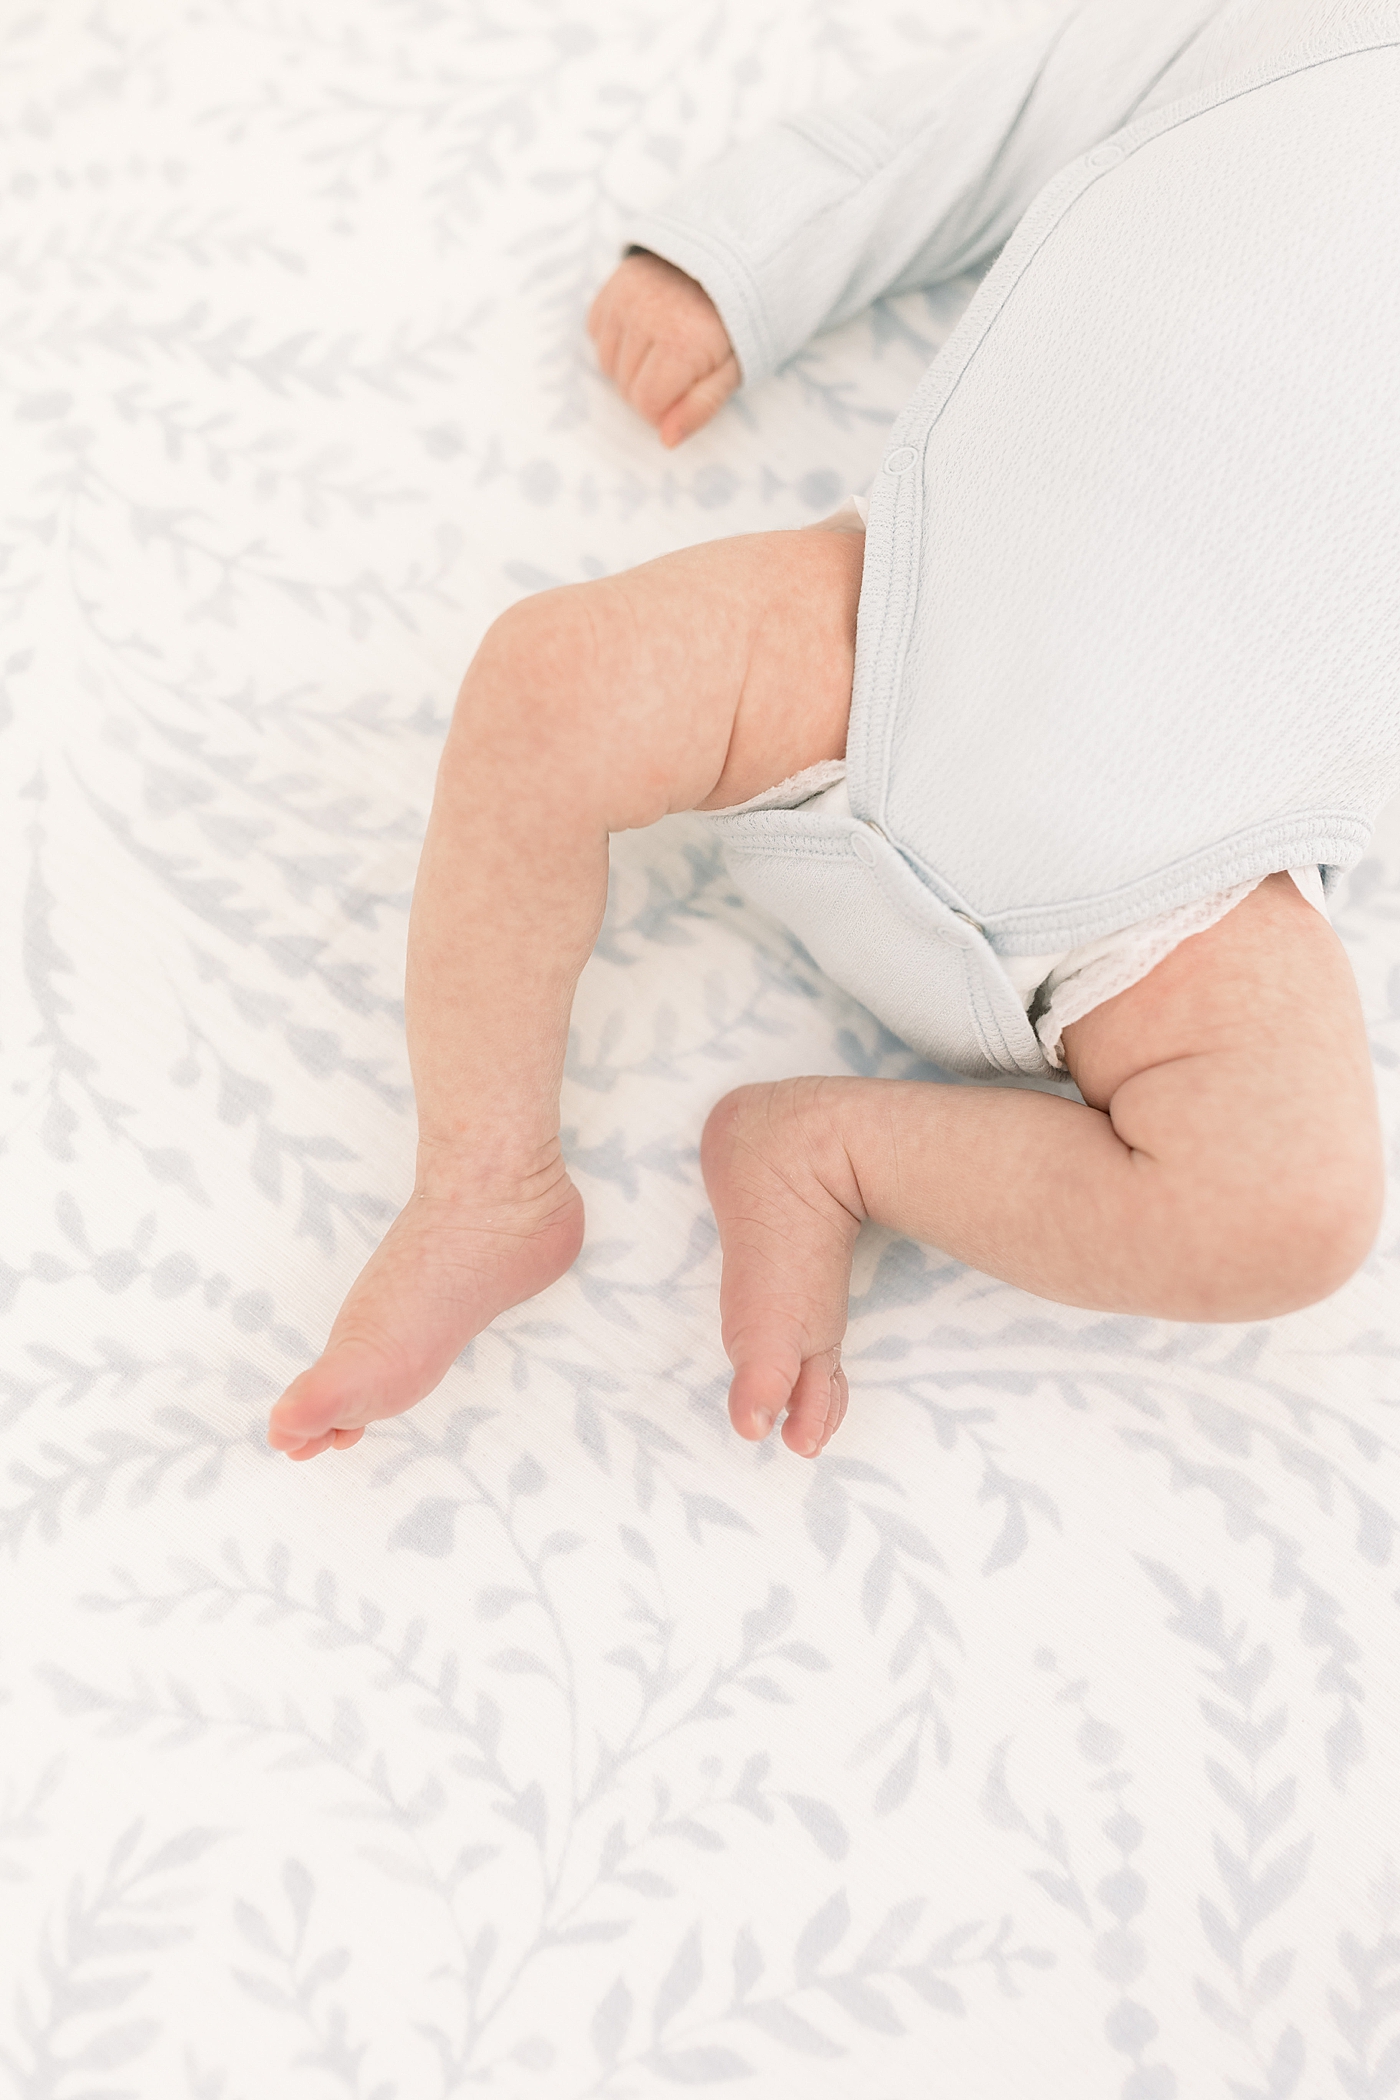 Overhead vignette of baby feet in a light blue onesie and soft light during baby boy newborn session | Image by Caitlyn Motycka Photography